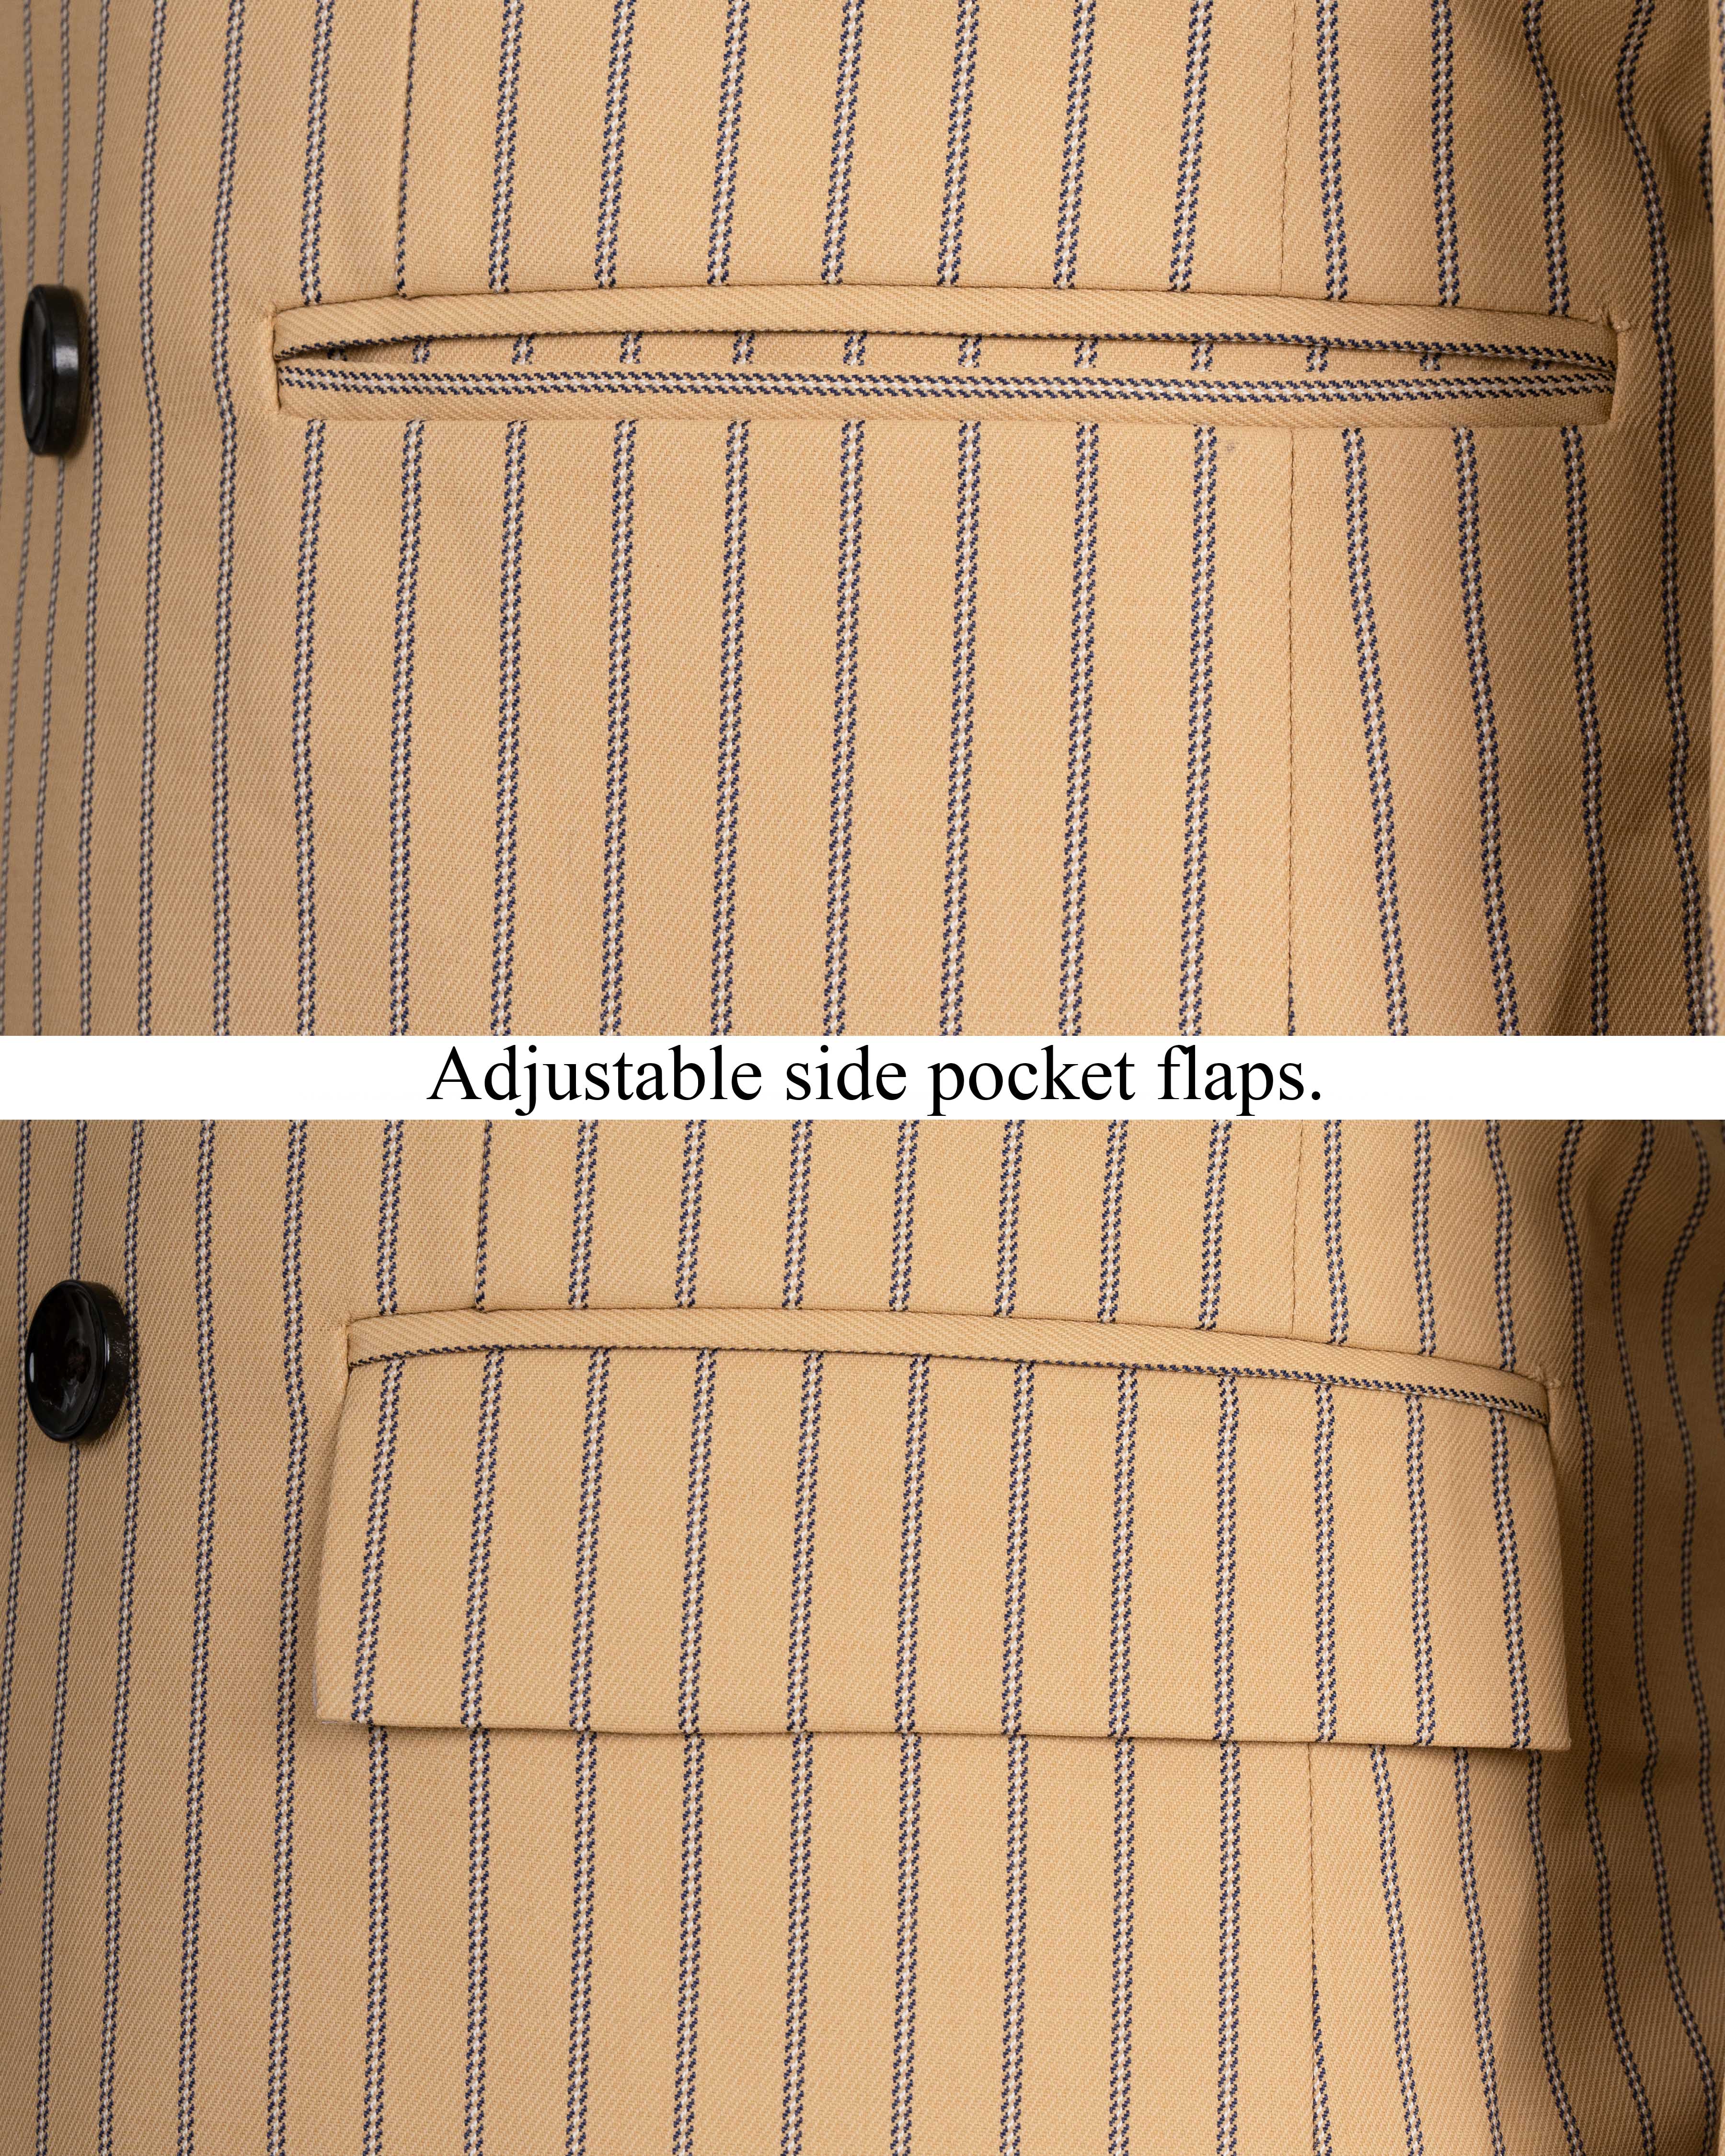 Harvest Gold Cream Striped Woolrich Double-breasted Blazer BL1518-DB-36, BL1518-DB-38, BL1518-DB-40, BL1518-DB-42, BL1518-DB-44, BL1518-DB-46, BL1518-DB-48, BL1518-DB-50, BL1518-DB-52, BL1518-DB-54, BL1518-DB-56, BL1518-DB-58, BL1518-DB-60